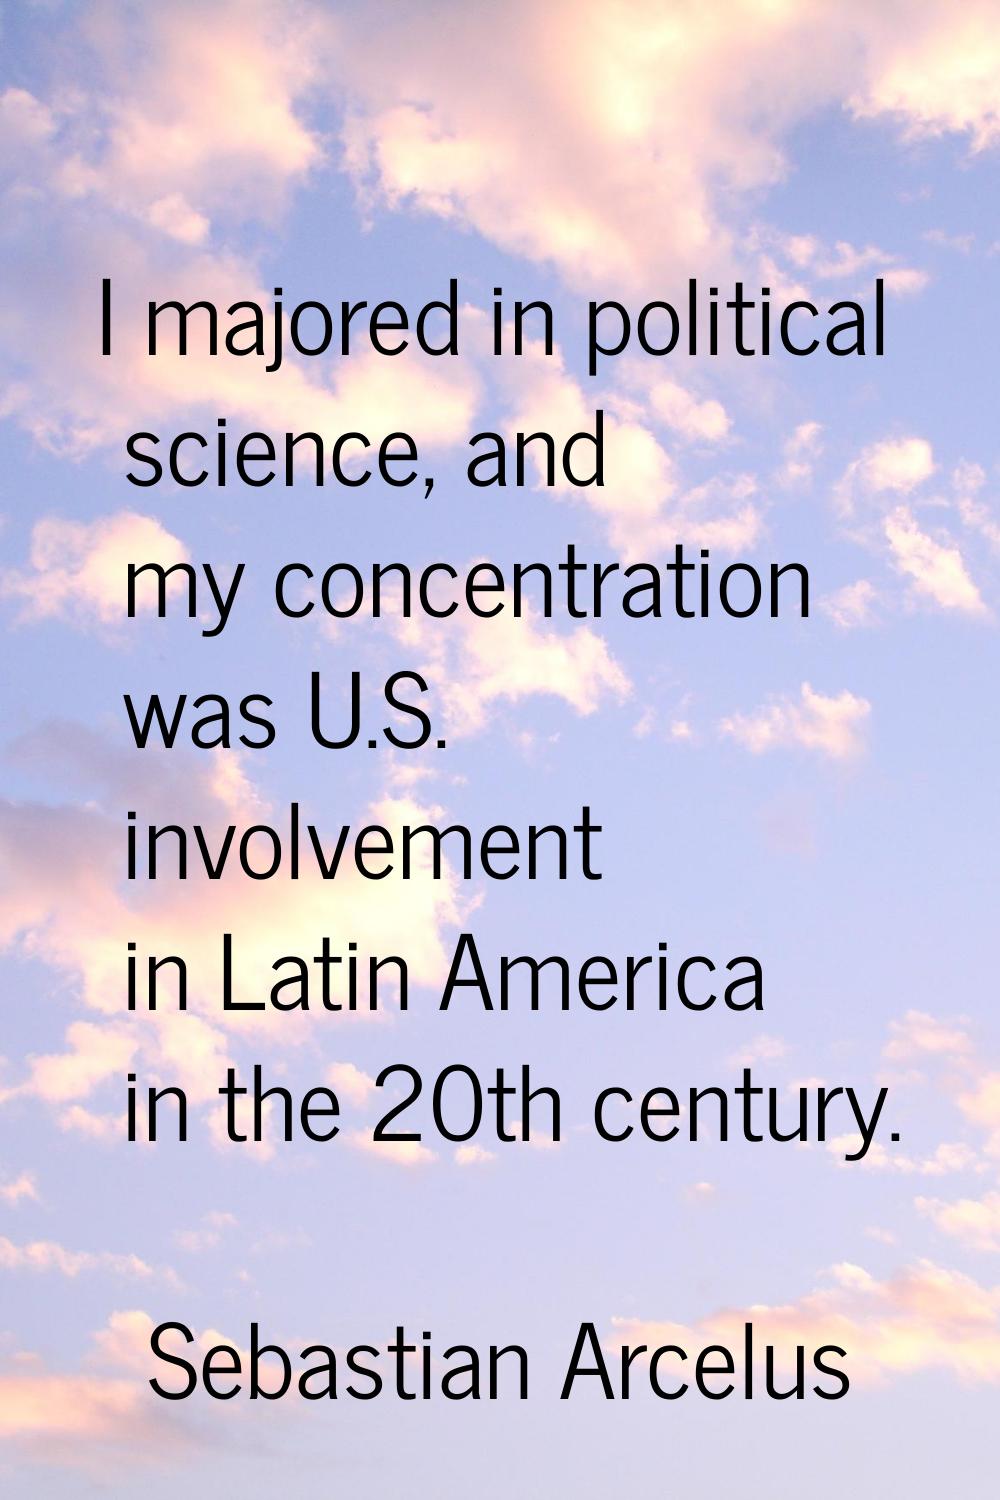 I majored in political science, and my concentration was U.S. involvement in Latin America in the 2